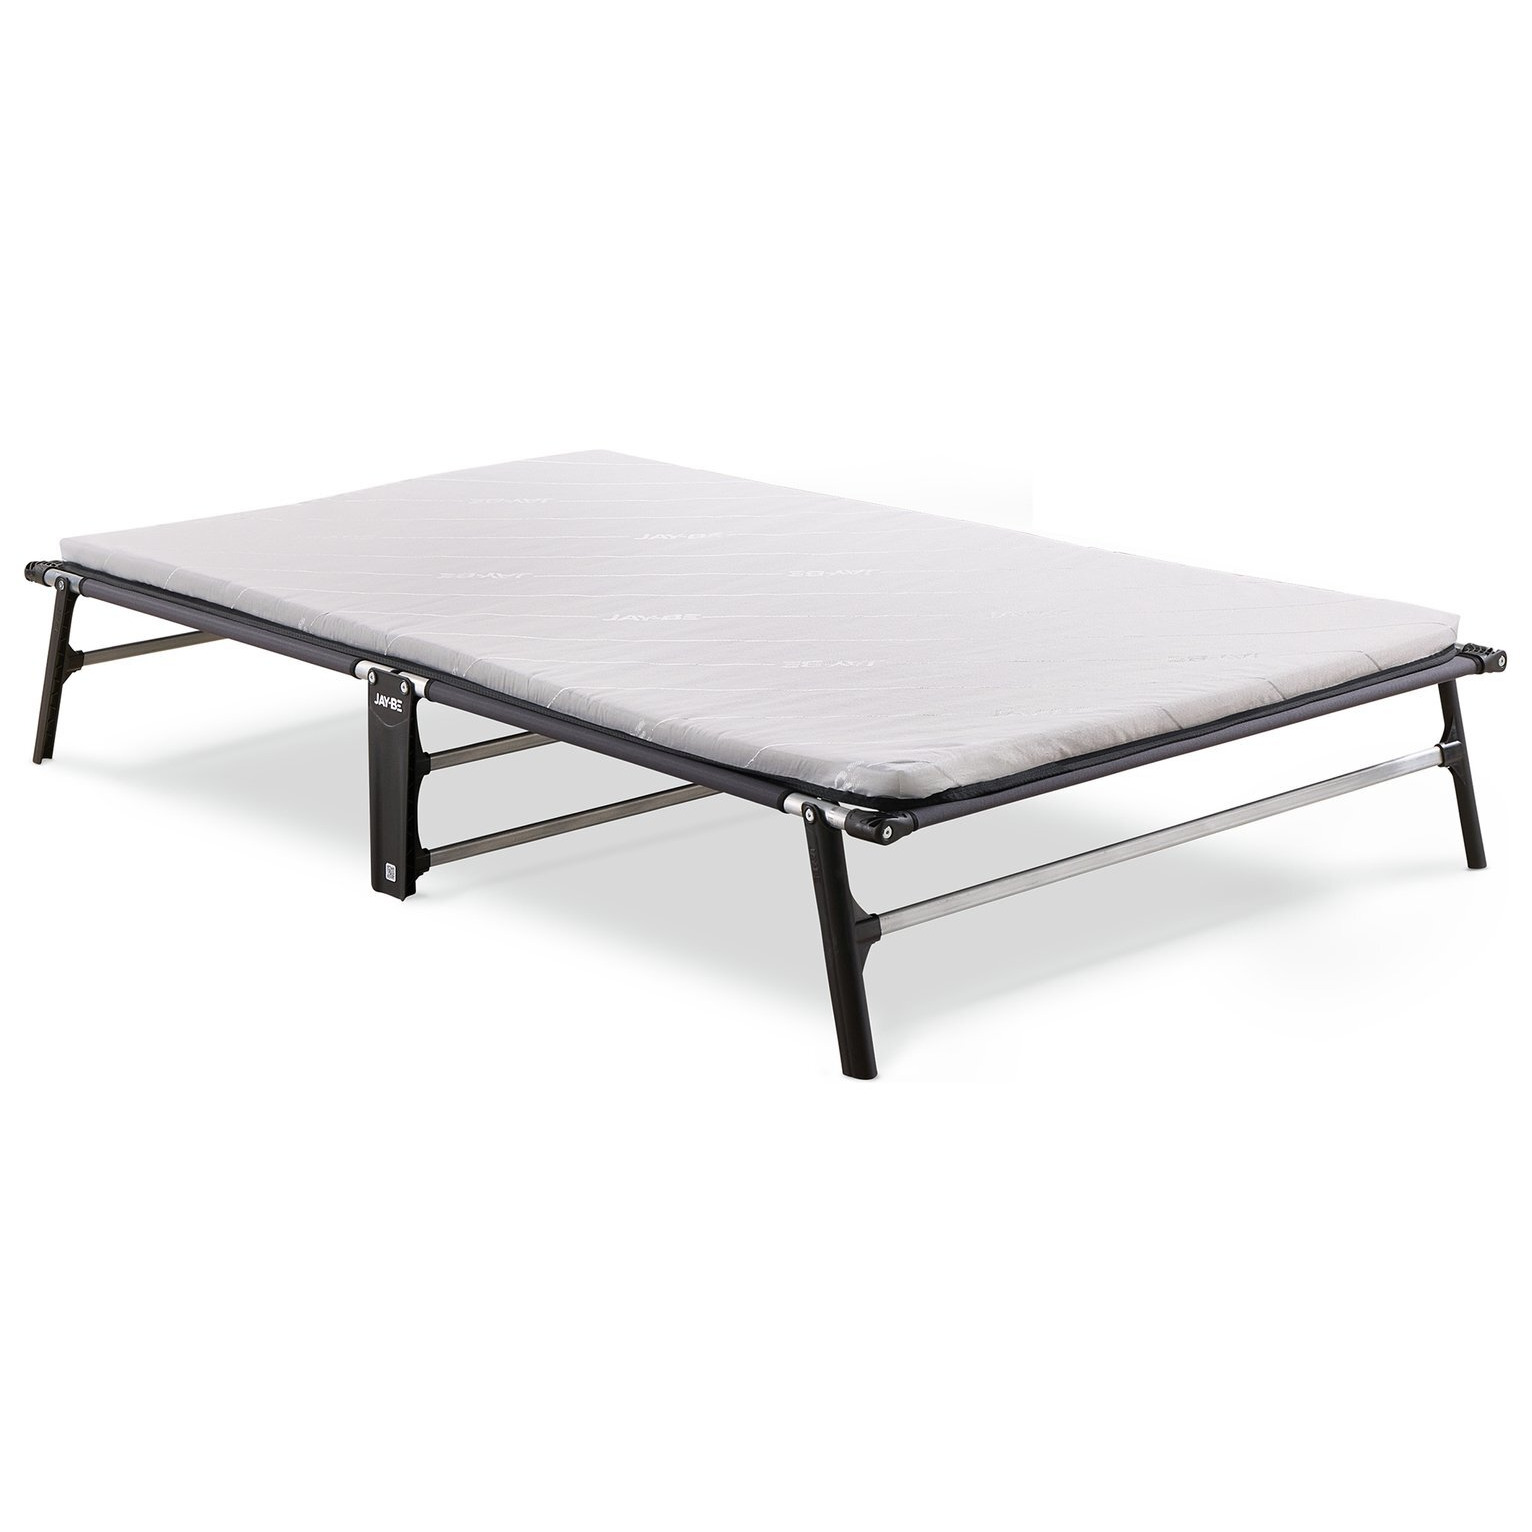 Jay-Be Compact Folding Bed with Mattress - Small Double - image 1